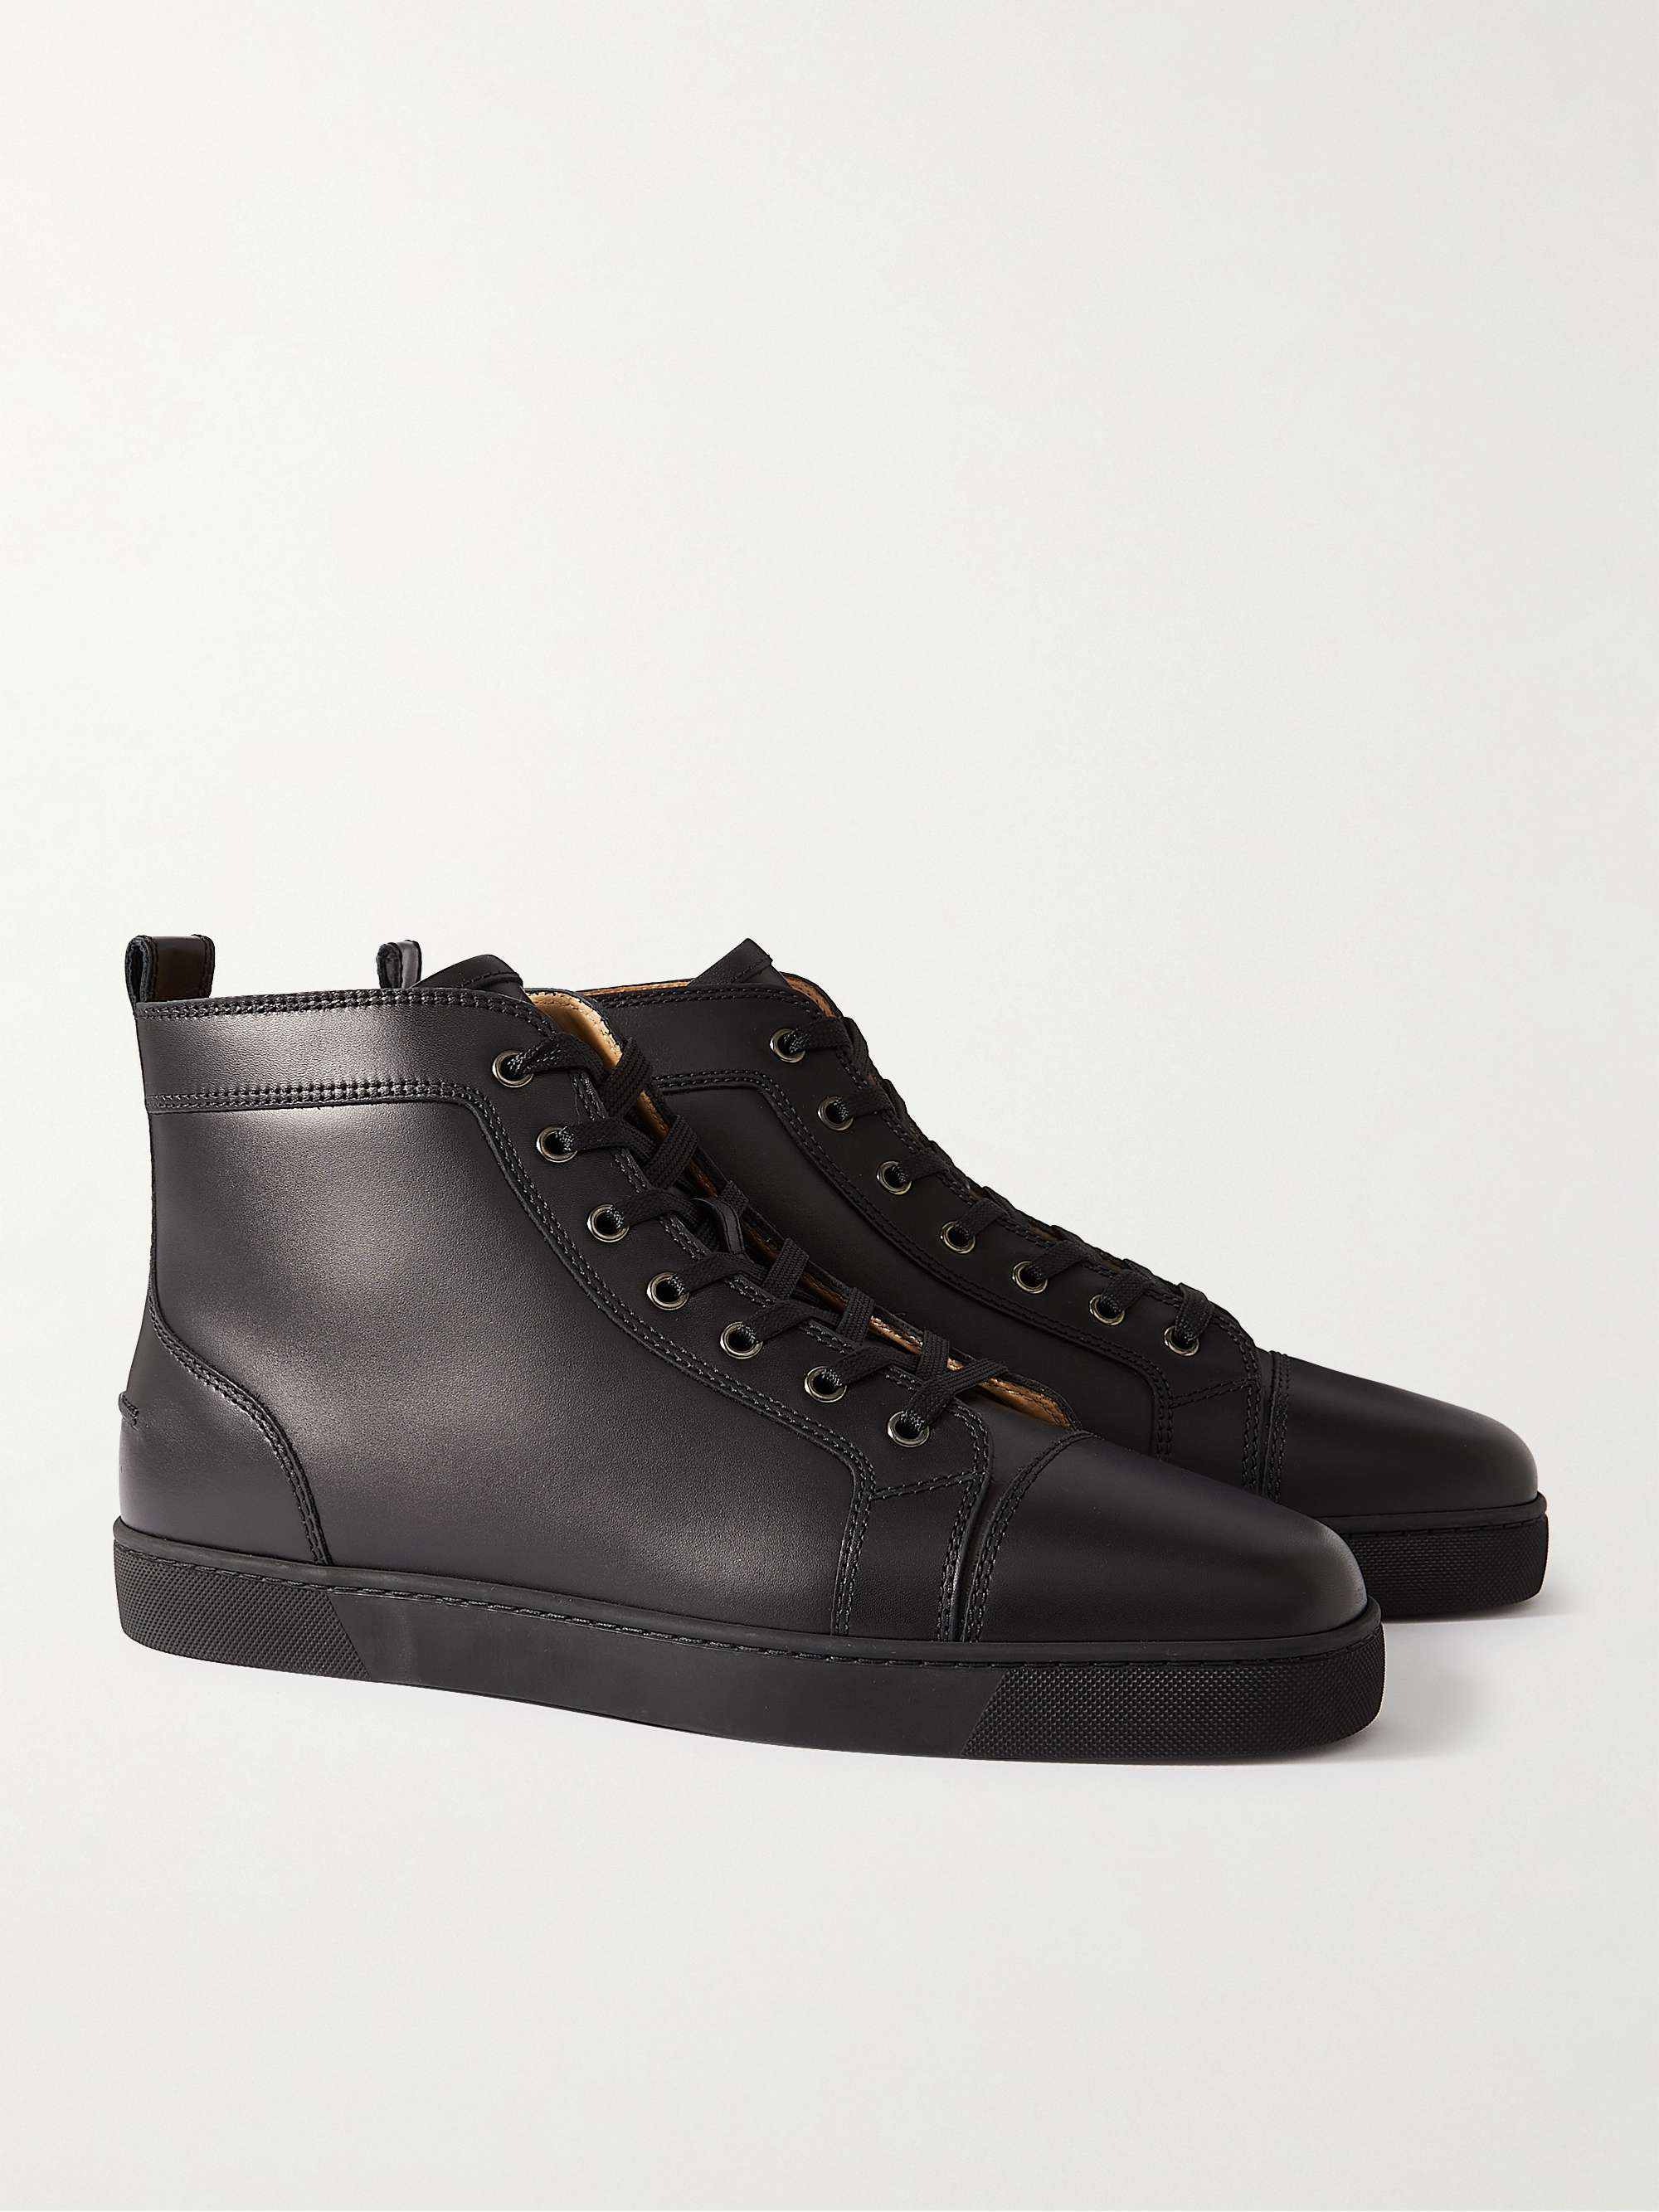 Black Louis Leather High-Top Sneakers | CHRISTIAN LOUBOUTIN | MR PORTER